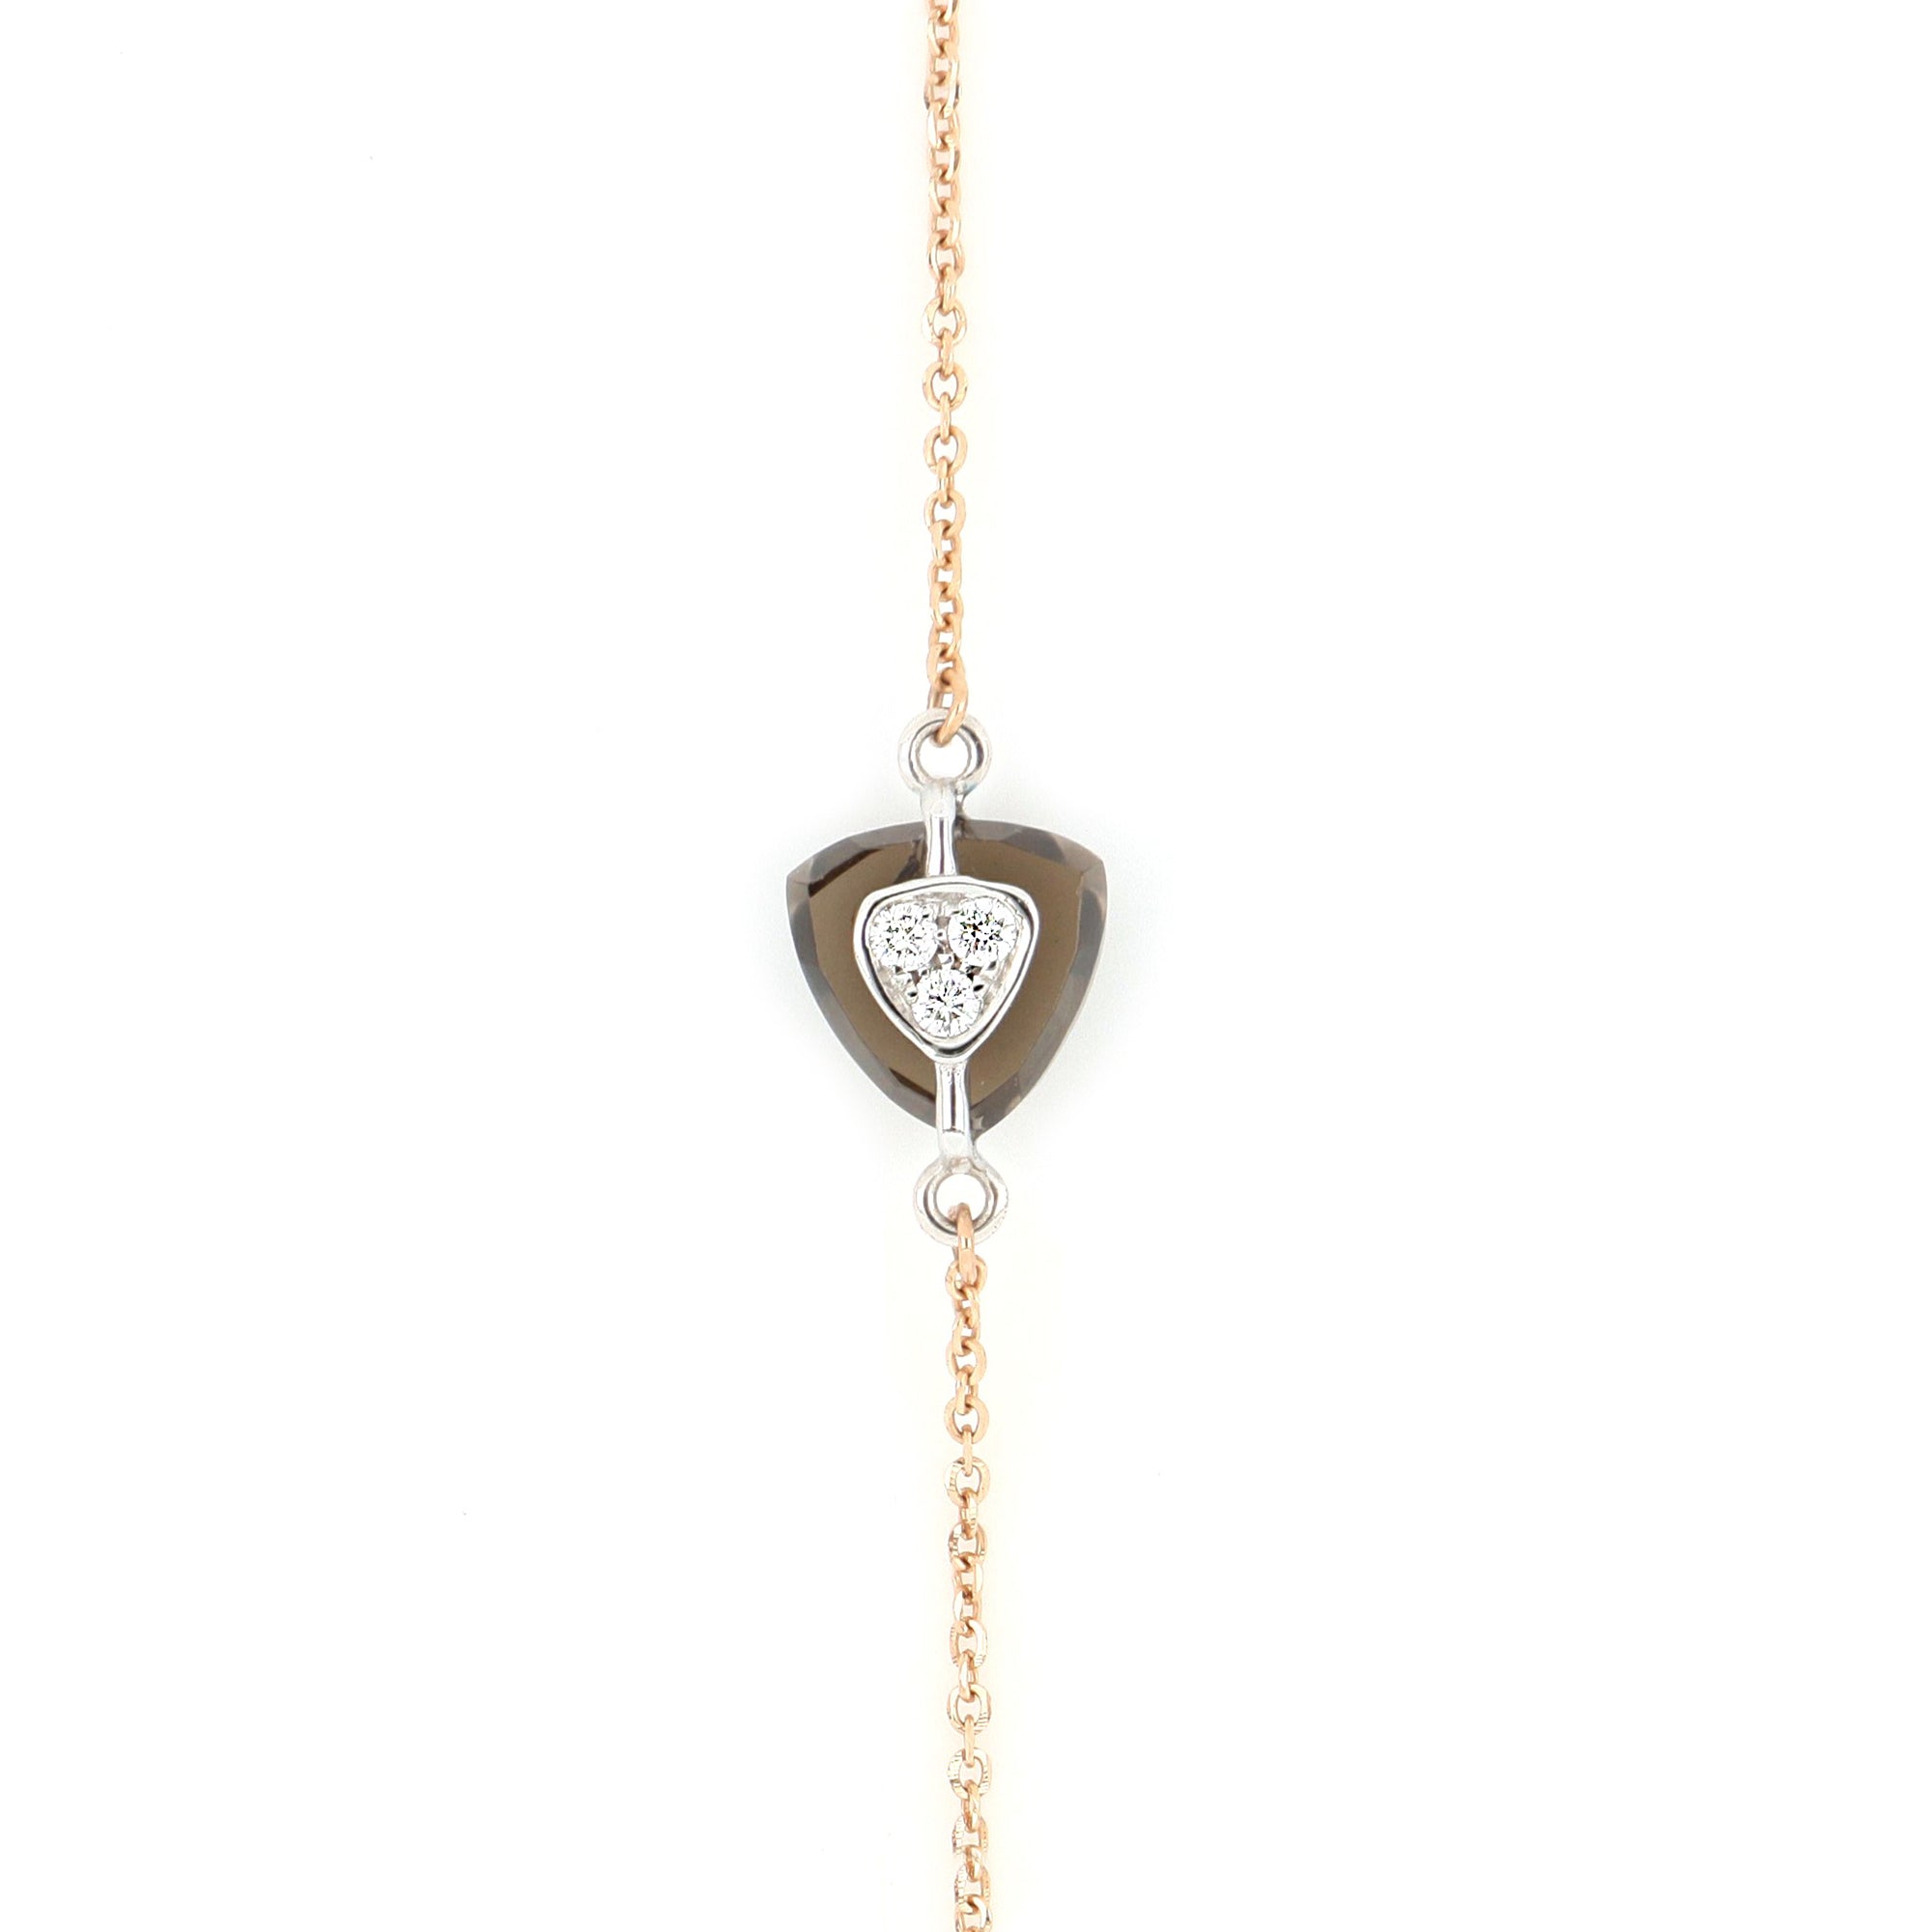 Les Petits Bonbons 110 cm Necklace with Natural Stones and Diamonds